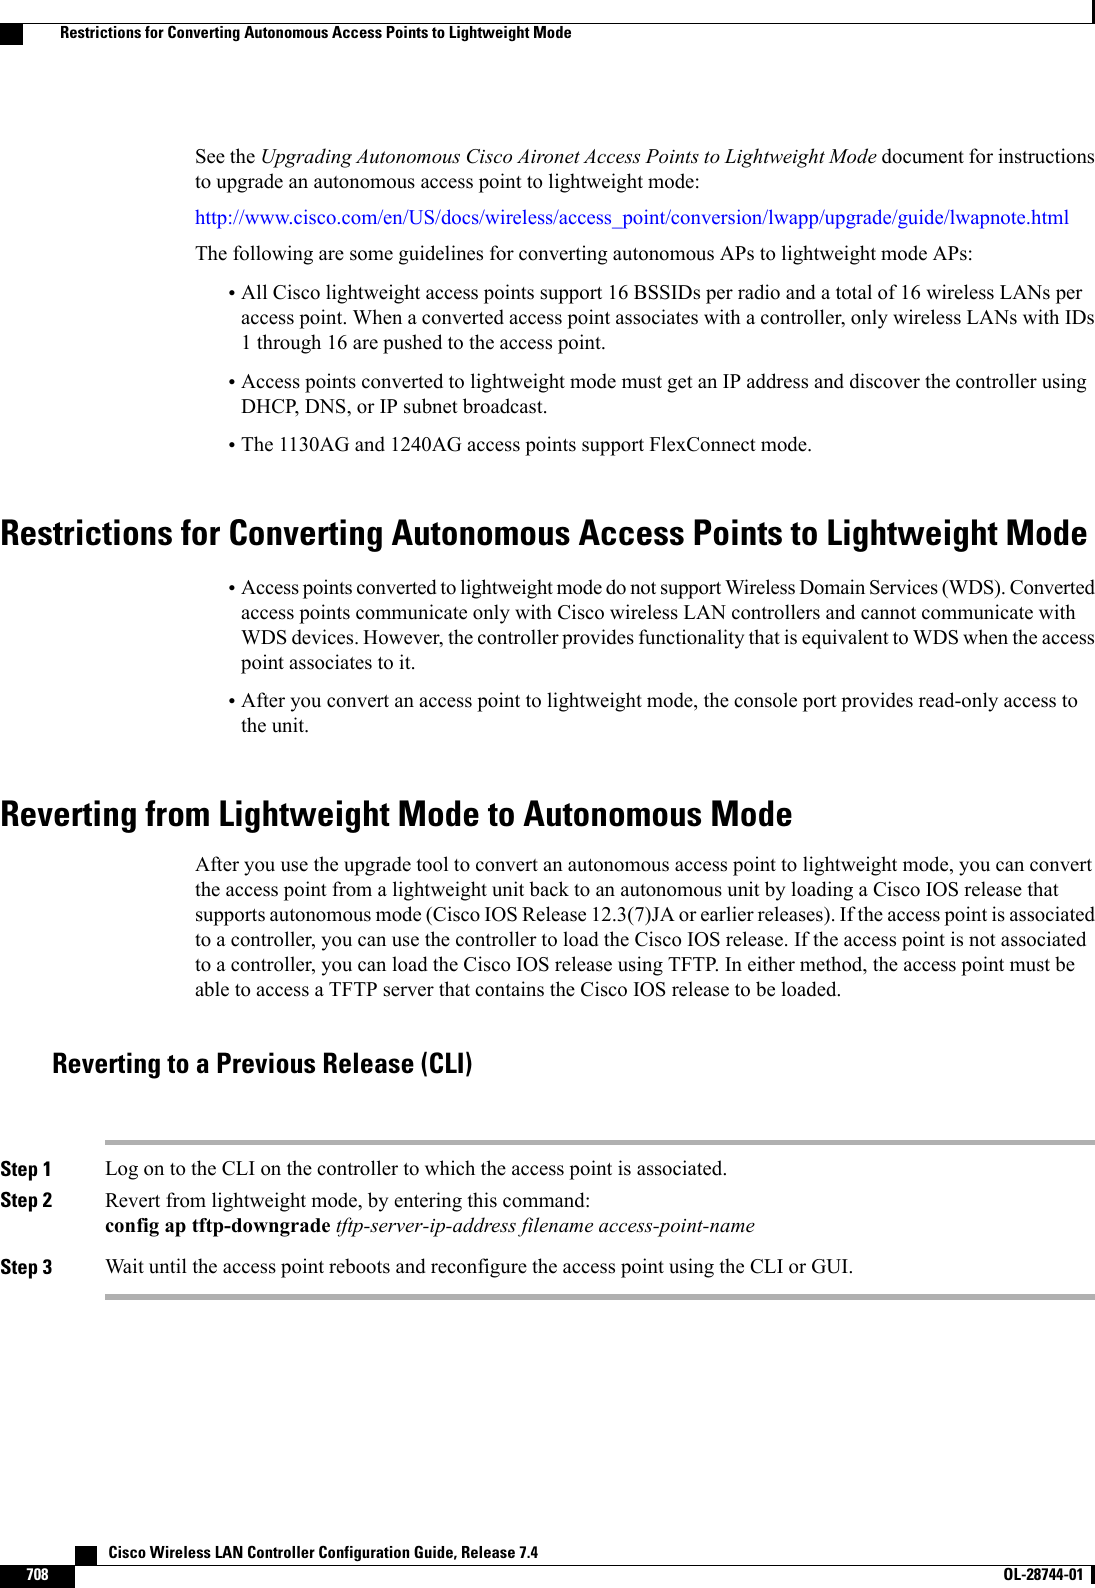 See the Upgrading Autonomous Cisco Aironet Access Points to Lightweight Mode document for instructionsto upgrade an autonomous access point to lightweight mode:http://www.cisco.com/en/US/docs/wireless/access_point/conversion/lwapp/upgrade/guide/lwapnote.htmlThe following are some guidelines for converting autonomous APs to lightweight mode APs:•All Cisco lightweight access points support 16 BSSIDs per radio and a total of 16 wireless LANs peraccess point. When a converted access point associates with a controller, only wireless LANs with IDs1 through 16 are pushed to the access point.•Access points converted to lightweight mode must get an IP address and discover the controller usingDHCP, DNS, or IP subnet broadcast.•The 1130AG and 1240AG access points support FlexConnect mode.Restrictions for Converting Autonomous Access Points to Lightweight Mode•Access points converted to lightweight mode do not support Wireless Domain Services (WDS). Convertedaccess points communicate only with Cisco wireless LAN controllers and cannot communicate withWDS devices. However, the controller provides functionality that is equivalent to WDS when the accesspoint associates to it.•After you convert an access point to lightweight mode, the console port provides read-only access tothe unit.Reverting from Lightweight Mode to Autonomous ModeAfter you use the upgrade tool to convert an autonomous access point to lightweight mode, you can convertthe access point from a lightweight unit back to an autonomous unit by loading a Cisco IOS release thatsupports autonomous mode (Cisco IOS Release 12.3(7)JA or earlier releases). If the access point is associatedto a controller, you can use the controller to load the Cisco IOS release. If the access point is not associatedto a controller, you can load the Cisco IOS release using TFTP. In either method, the access point must beable to access a TFTP server that contains the Cisco IOS release to be loaded.Reverting to a Previous Release (CLI)Step 1 Log on to the CLI on the controller to which the access point is associated.Step 2 Revert from lightweight mode, by entering this command:config ap tftp-downgrade tftp-server-ip-address filename access-point-nameStep 3 Wait until the access point reboots and reconfigure the access point using the CLI or GUI.   Cisco Wireless LAN Controller Configuration Guide, Release 7.4708 OL-28744-01  Restrictions for Converting Autonomous Access Points to Lightweight Mode